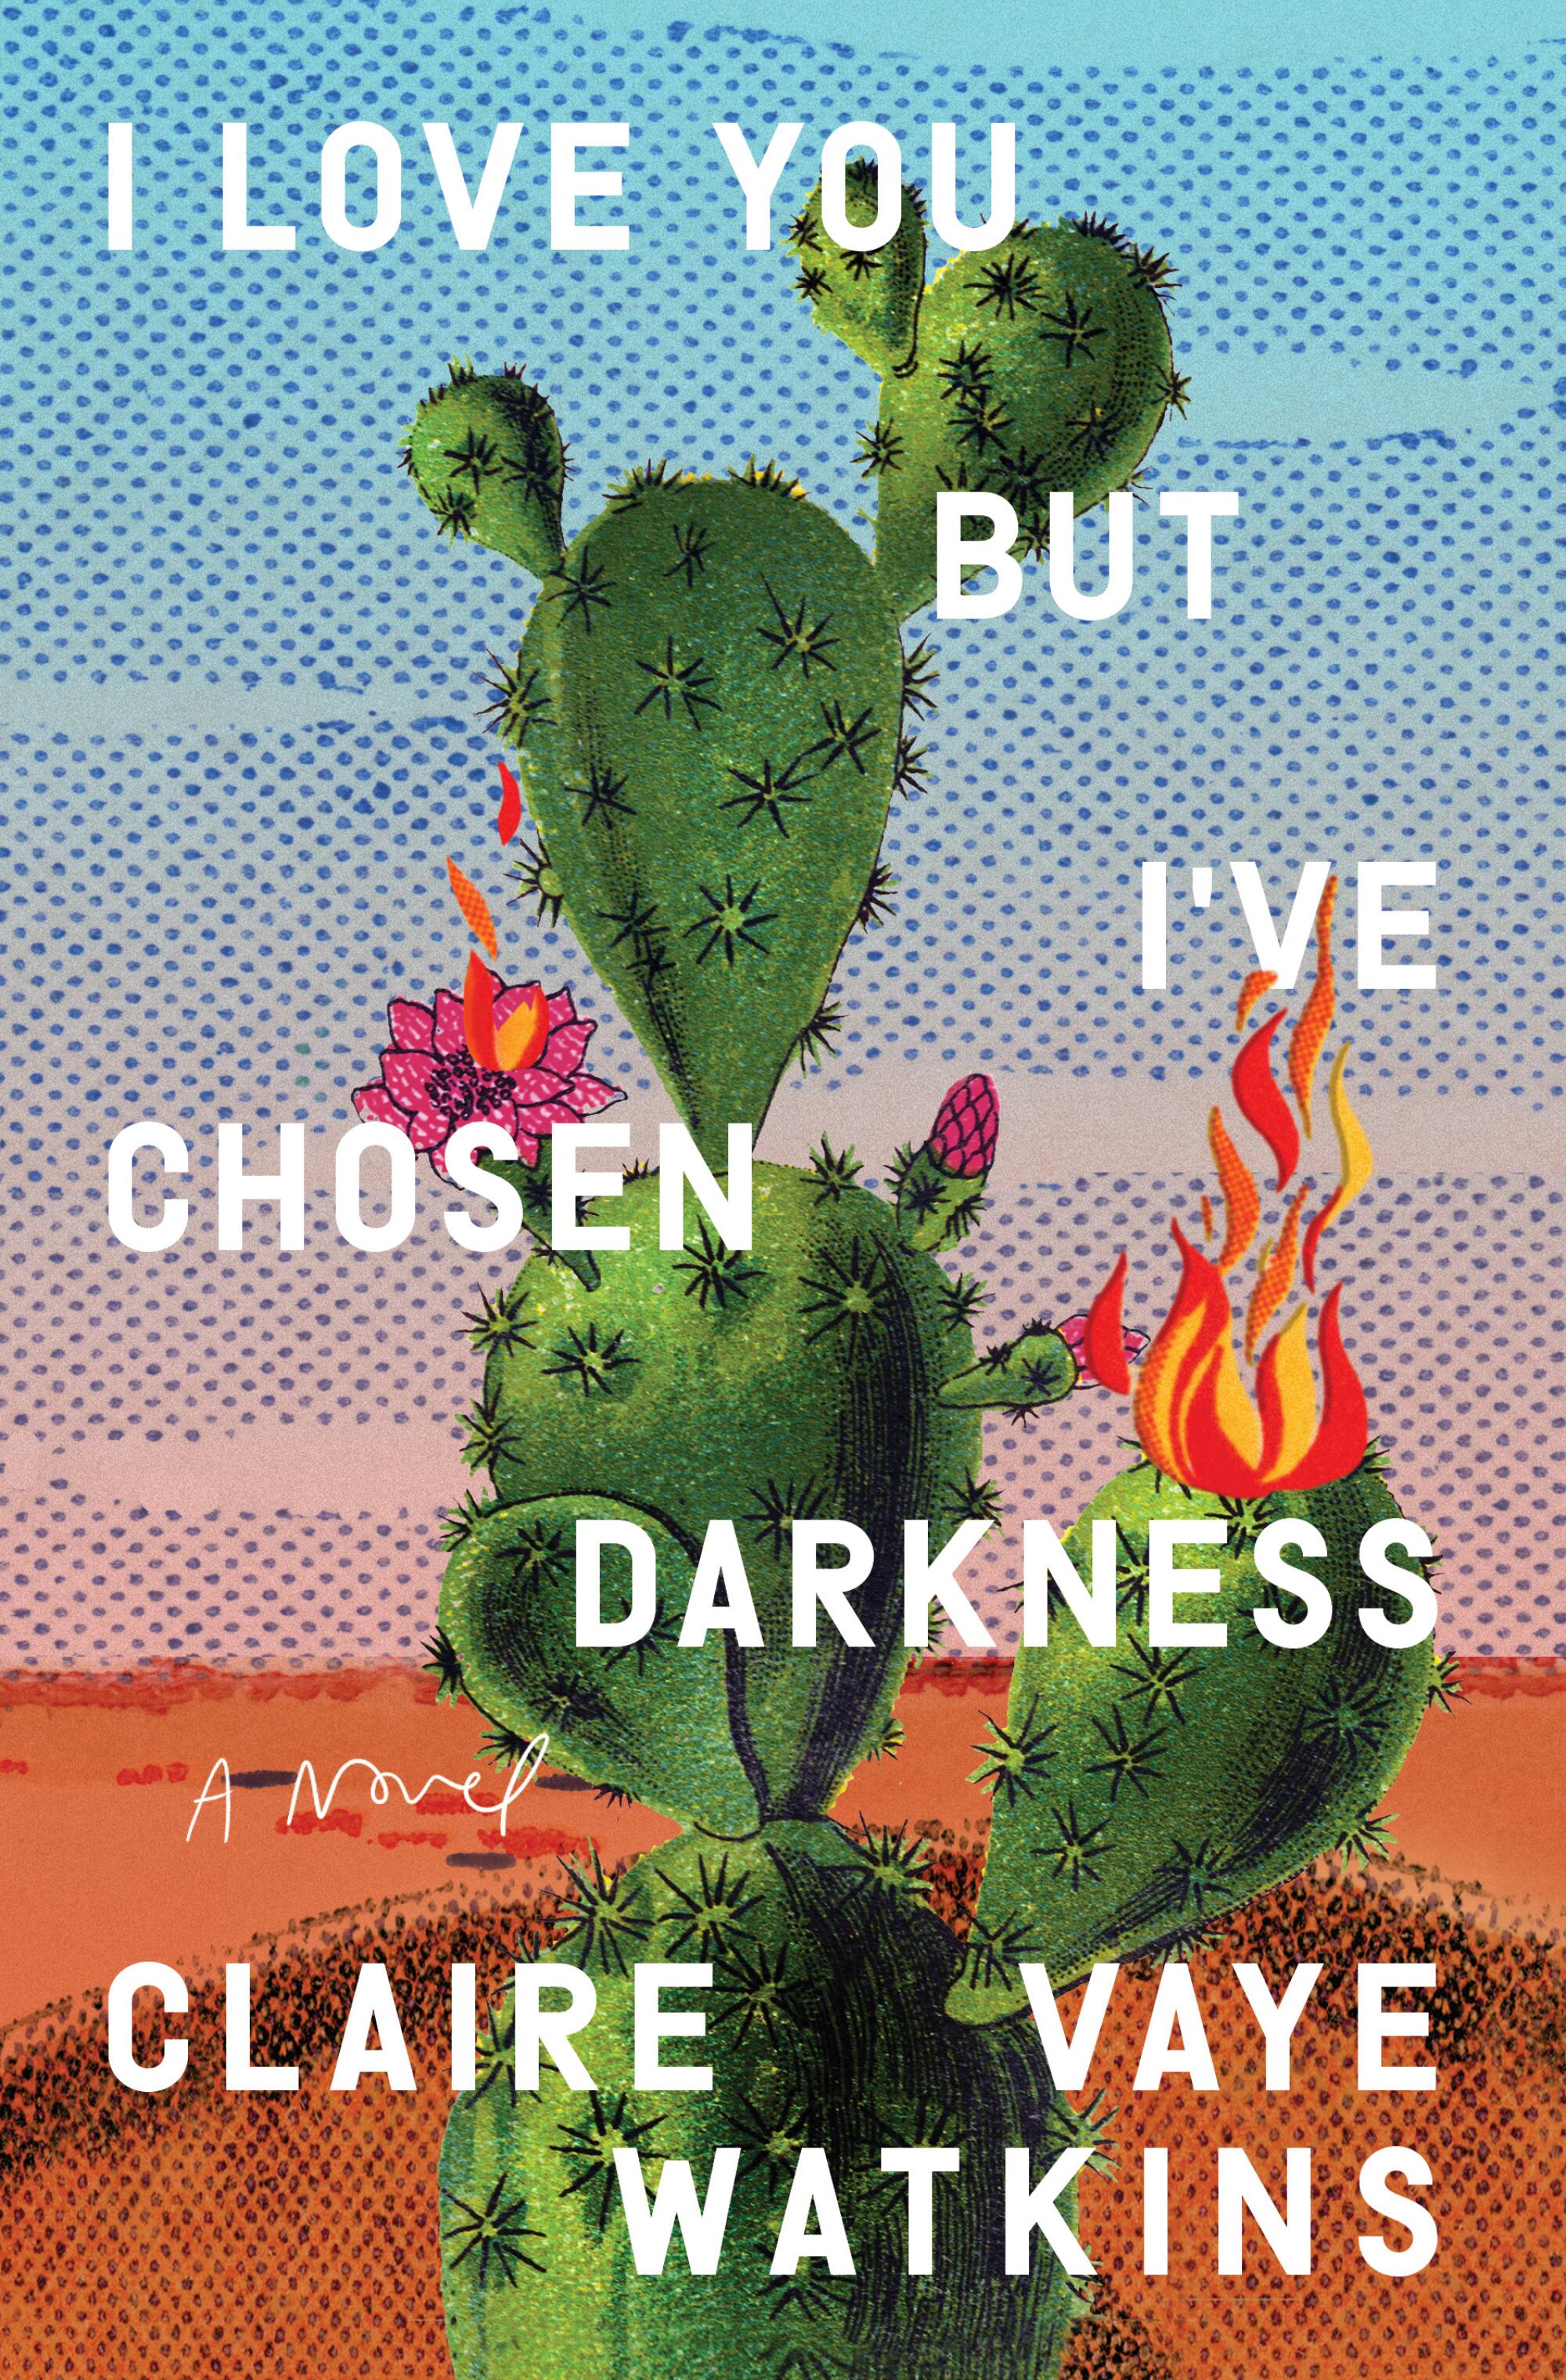 The cover of the book "I Love You but I've Chosen Darkness," by Claire Vaye Watkins